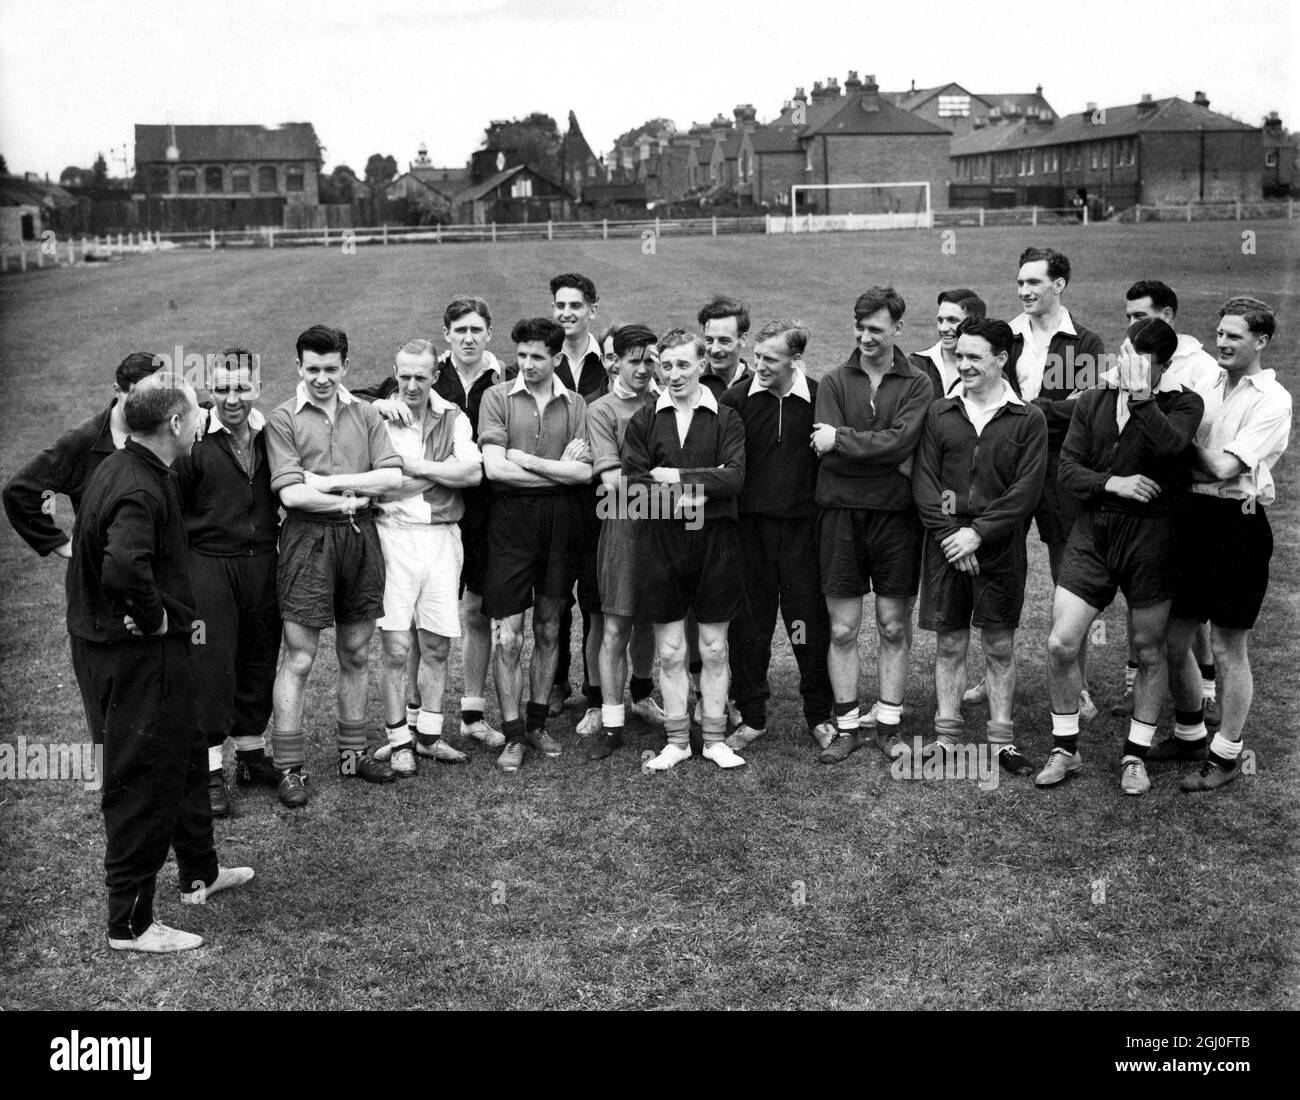 Britain's Olympic Footballers Tune Up Matt Busby (left) manager of Manchester United who is in charge of the players is seen talking to a party of Englishmen, Welshmen, Irishmen and Scotsmen - from which Great Britain's Olympic Team will be chosen. The party is now undergoing special training at Twyford in Berkshire. 22nd July 1948. Stock Photo